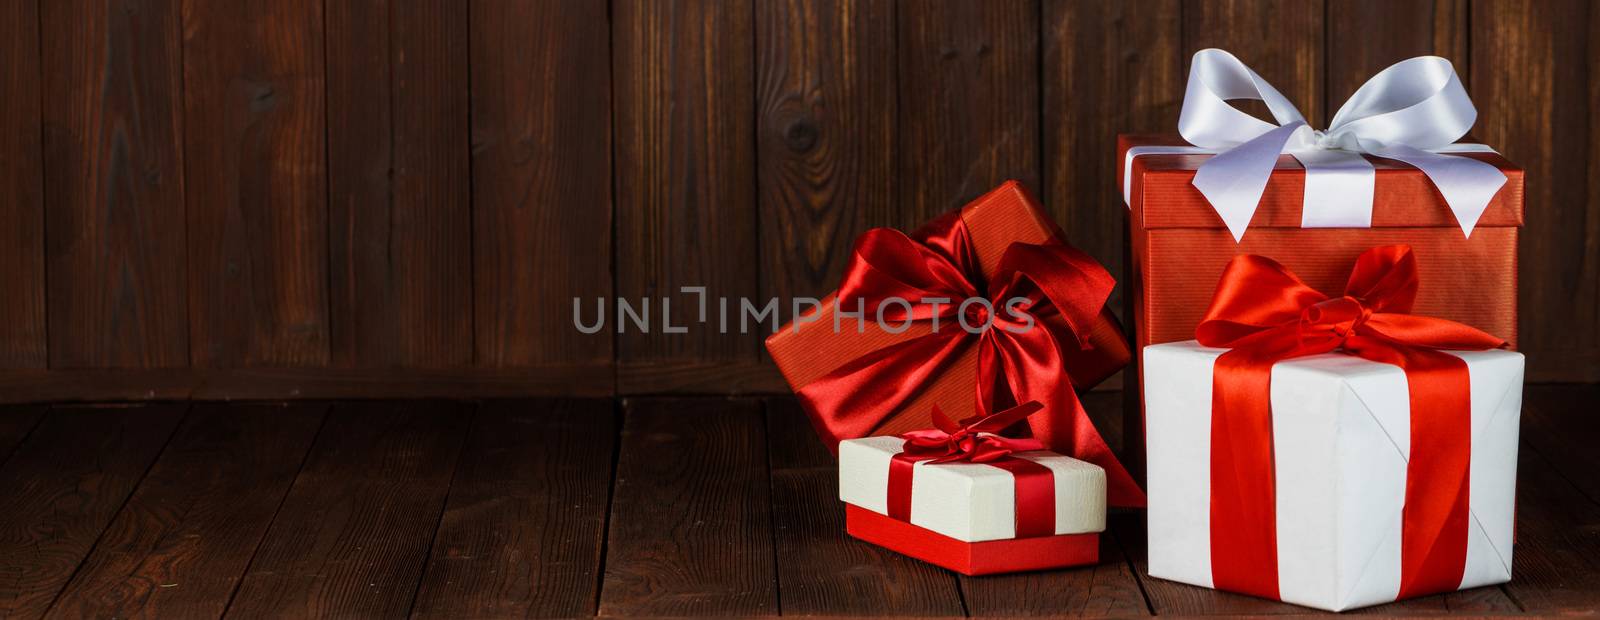 Gift boxes on wooden background by Yellowj